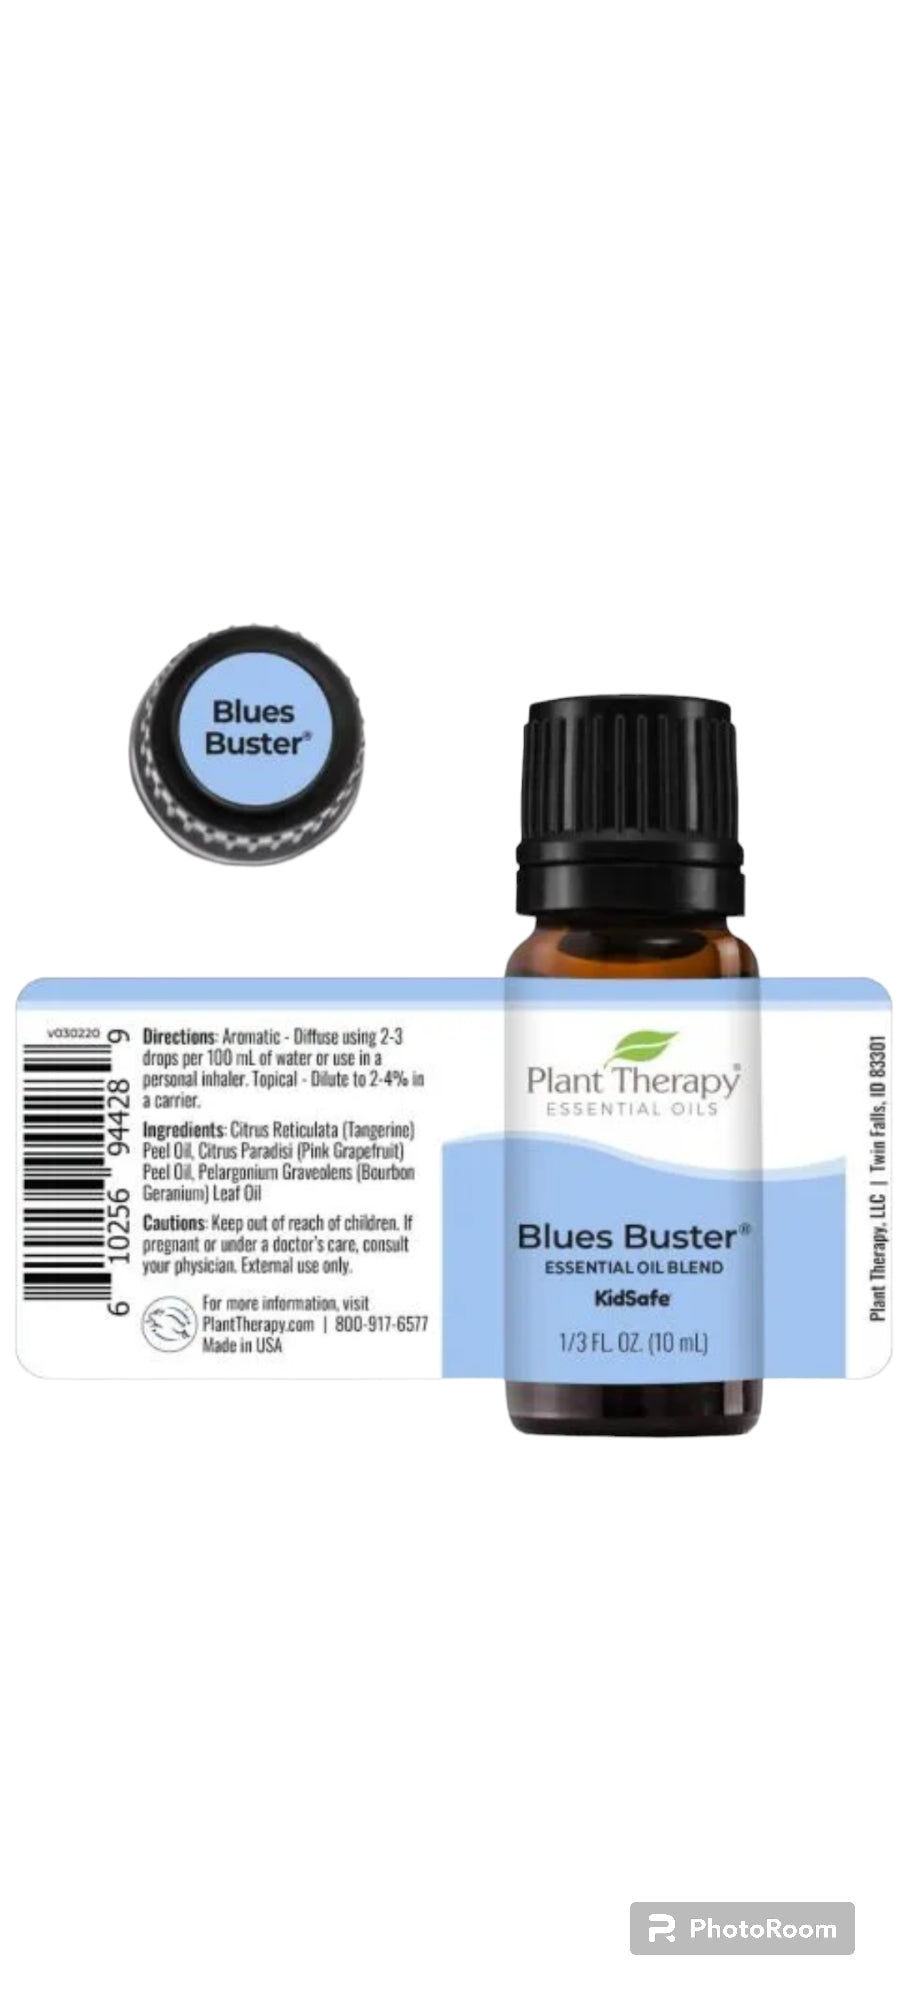 Blues Buster essential oil blend